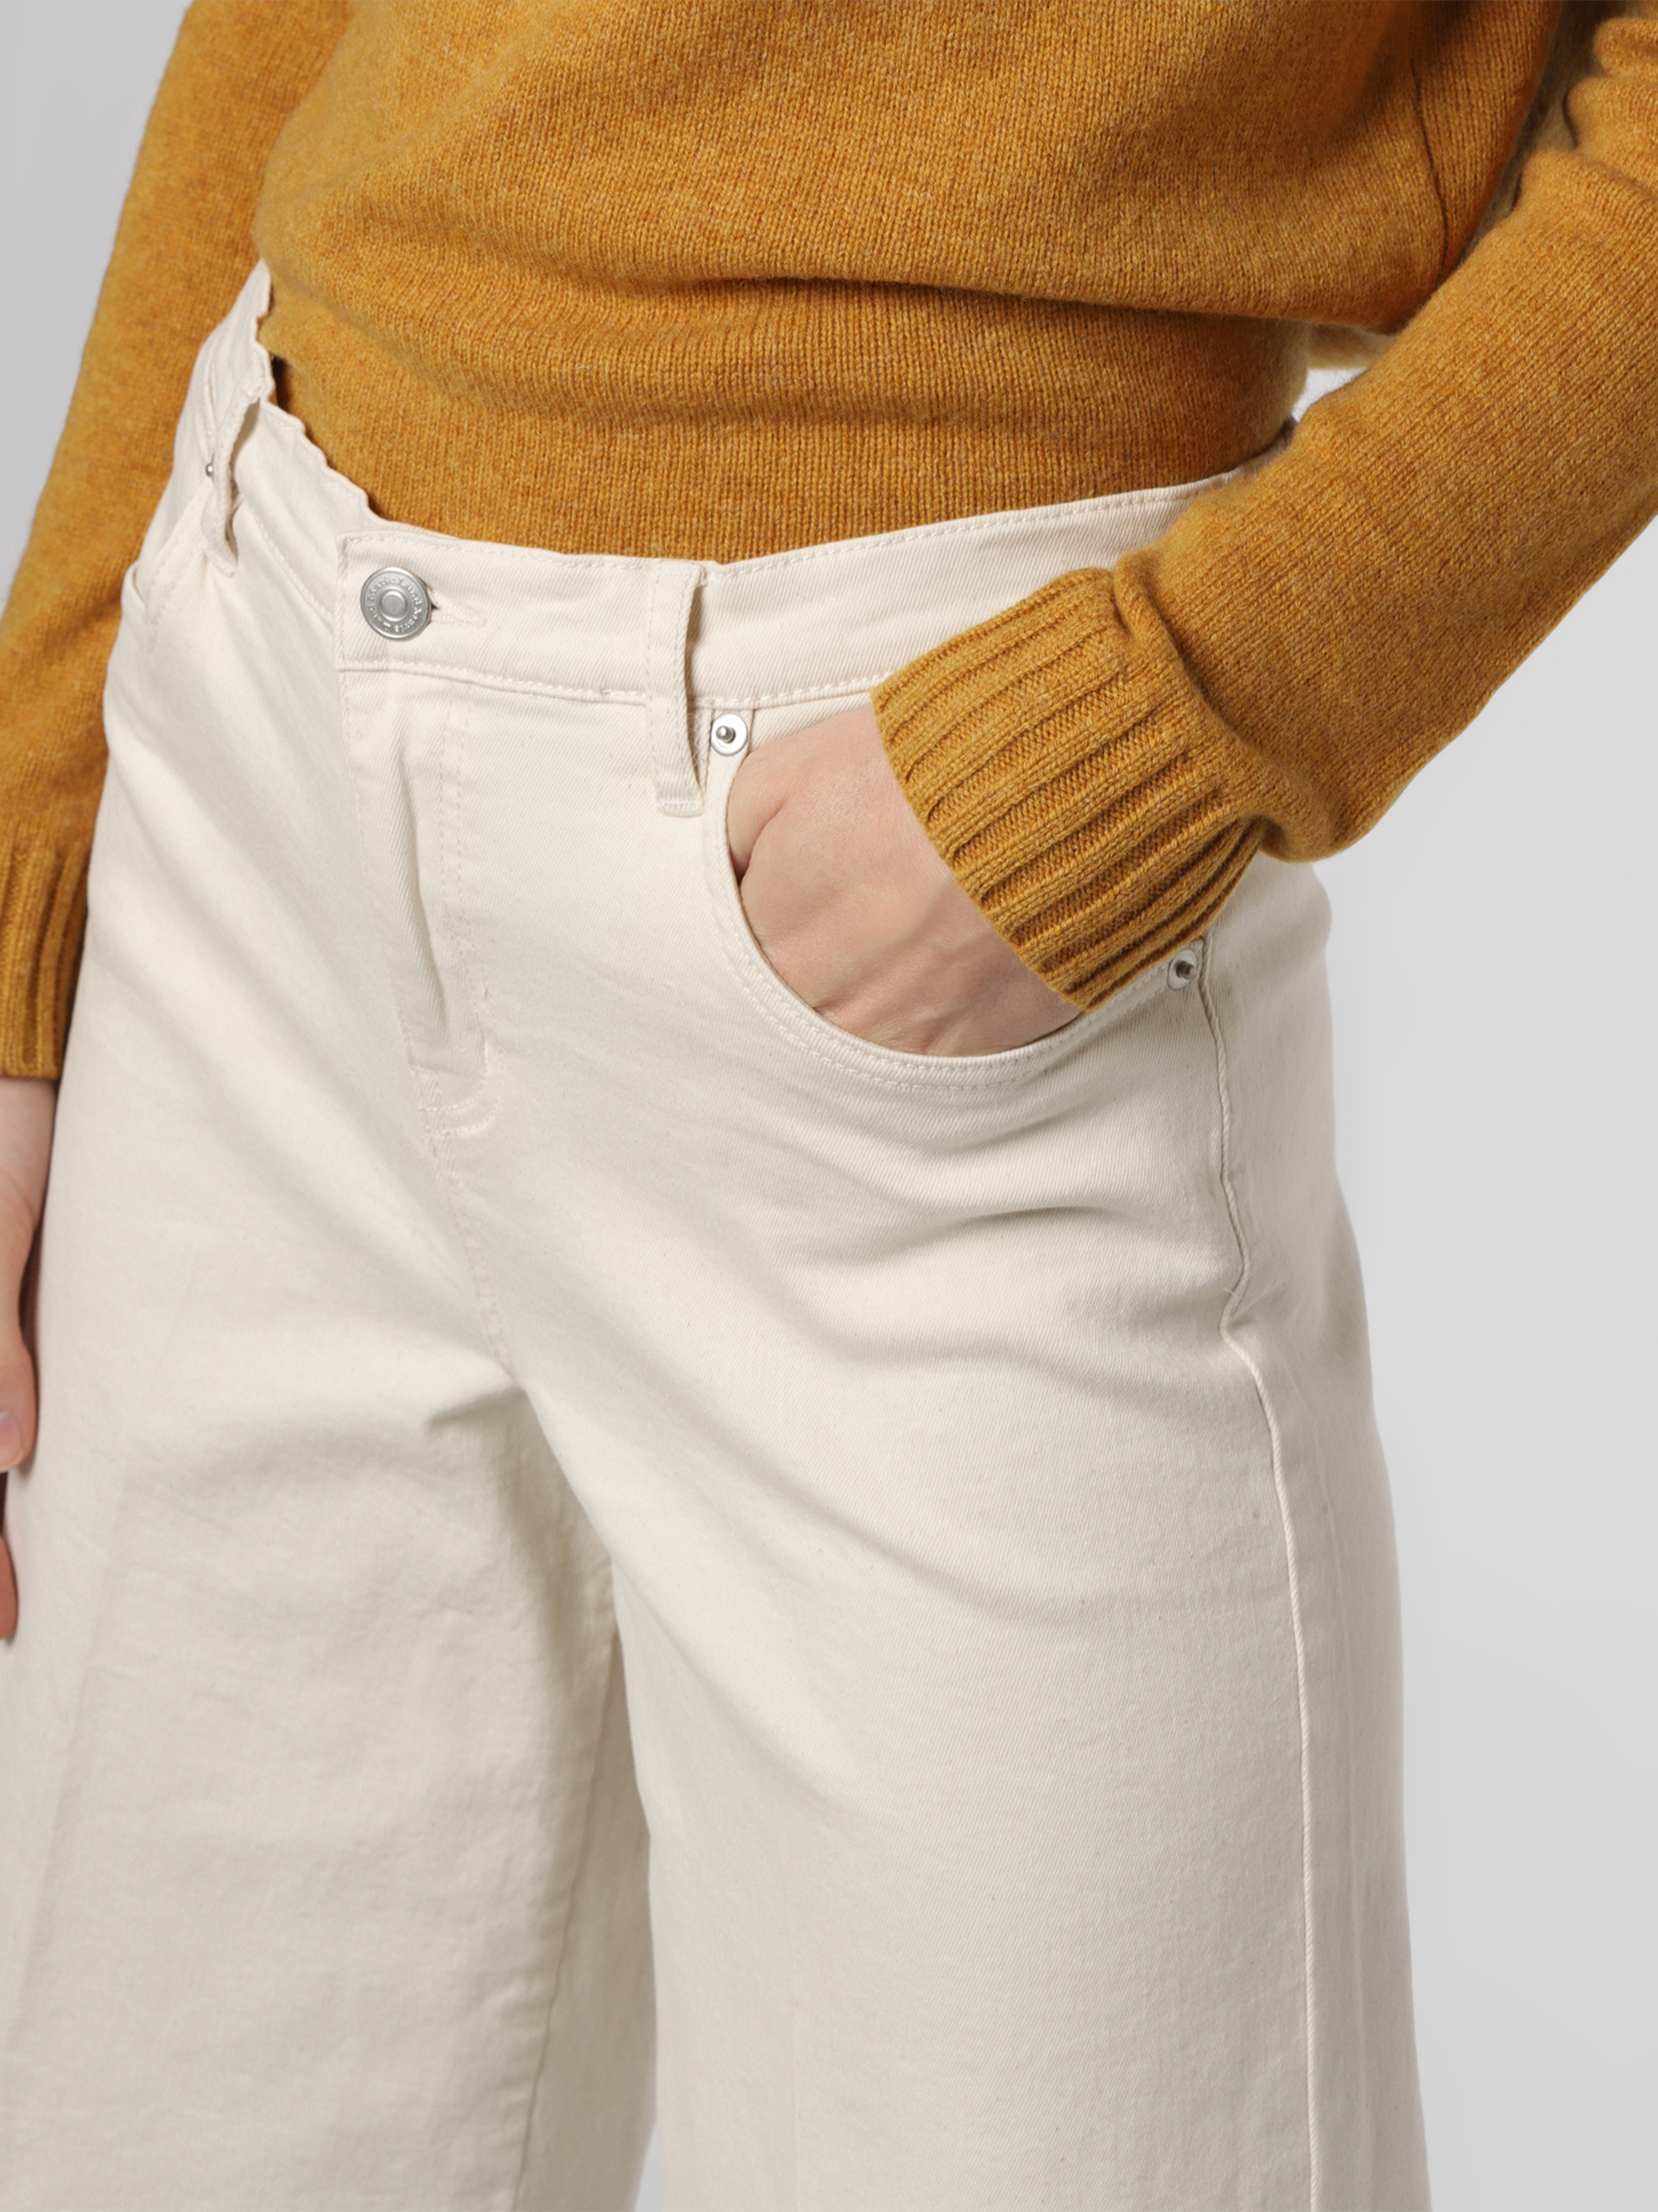 Marie Lund Jeans in Creme 